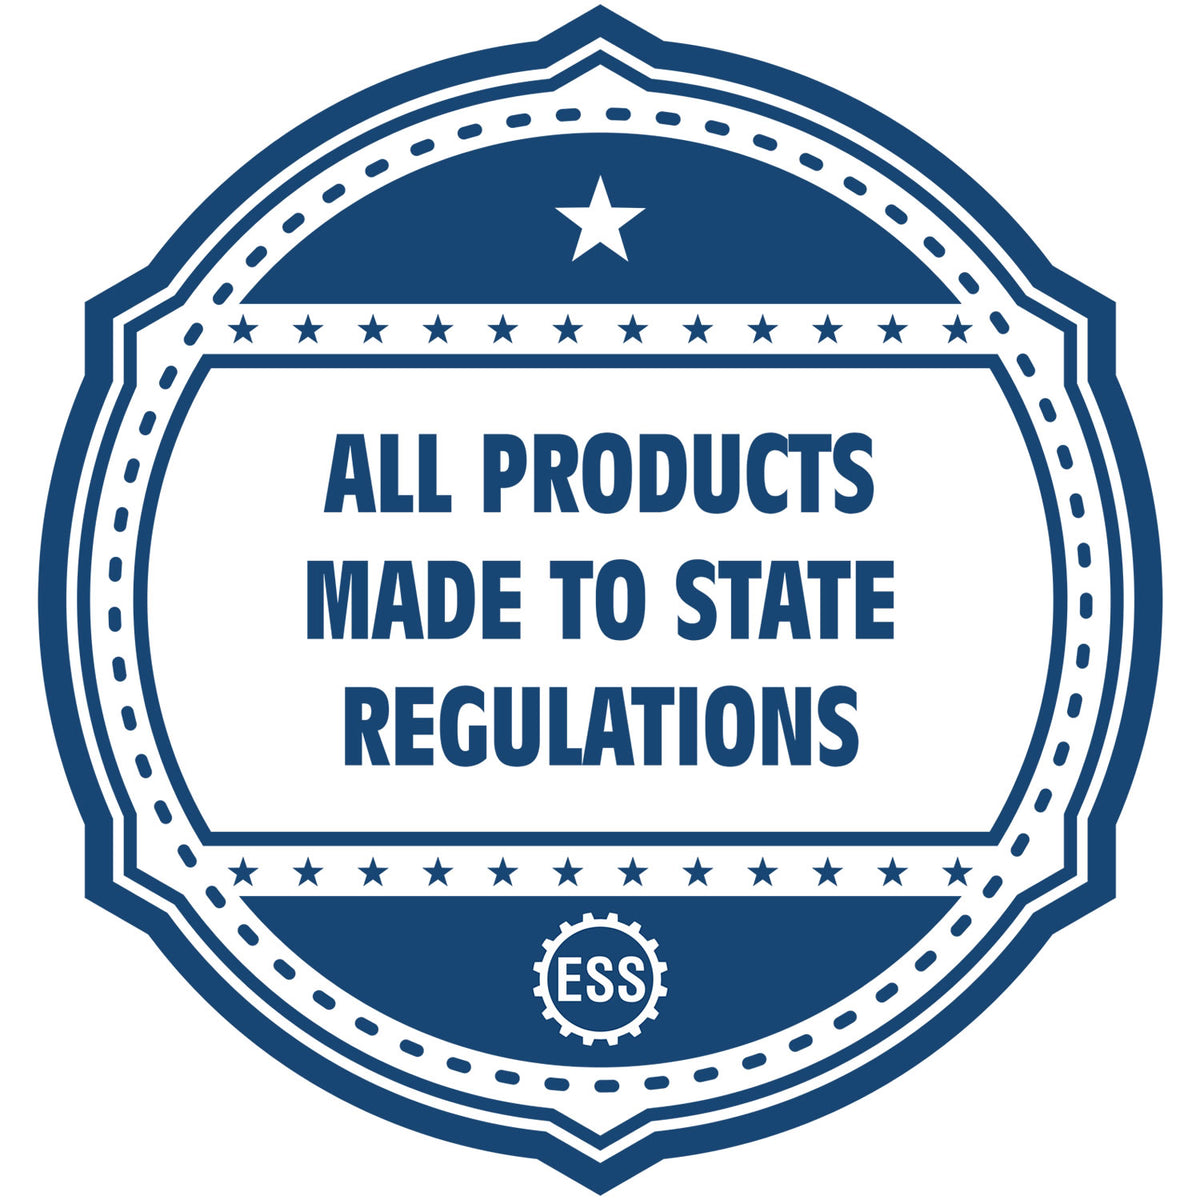 An icon or badge element for the Digital Alabama Landscape Architect Stamp showing that this product is made in compliance with state regulations.